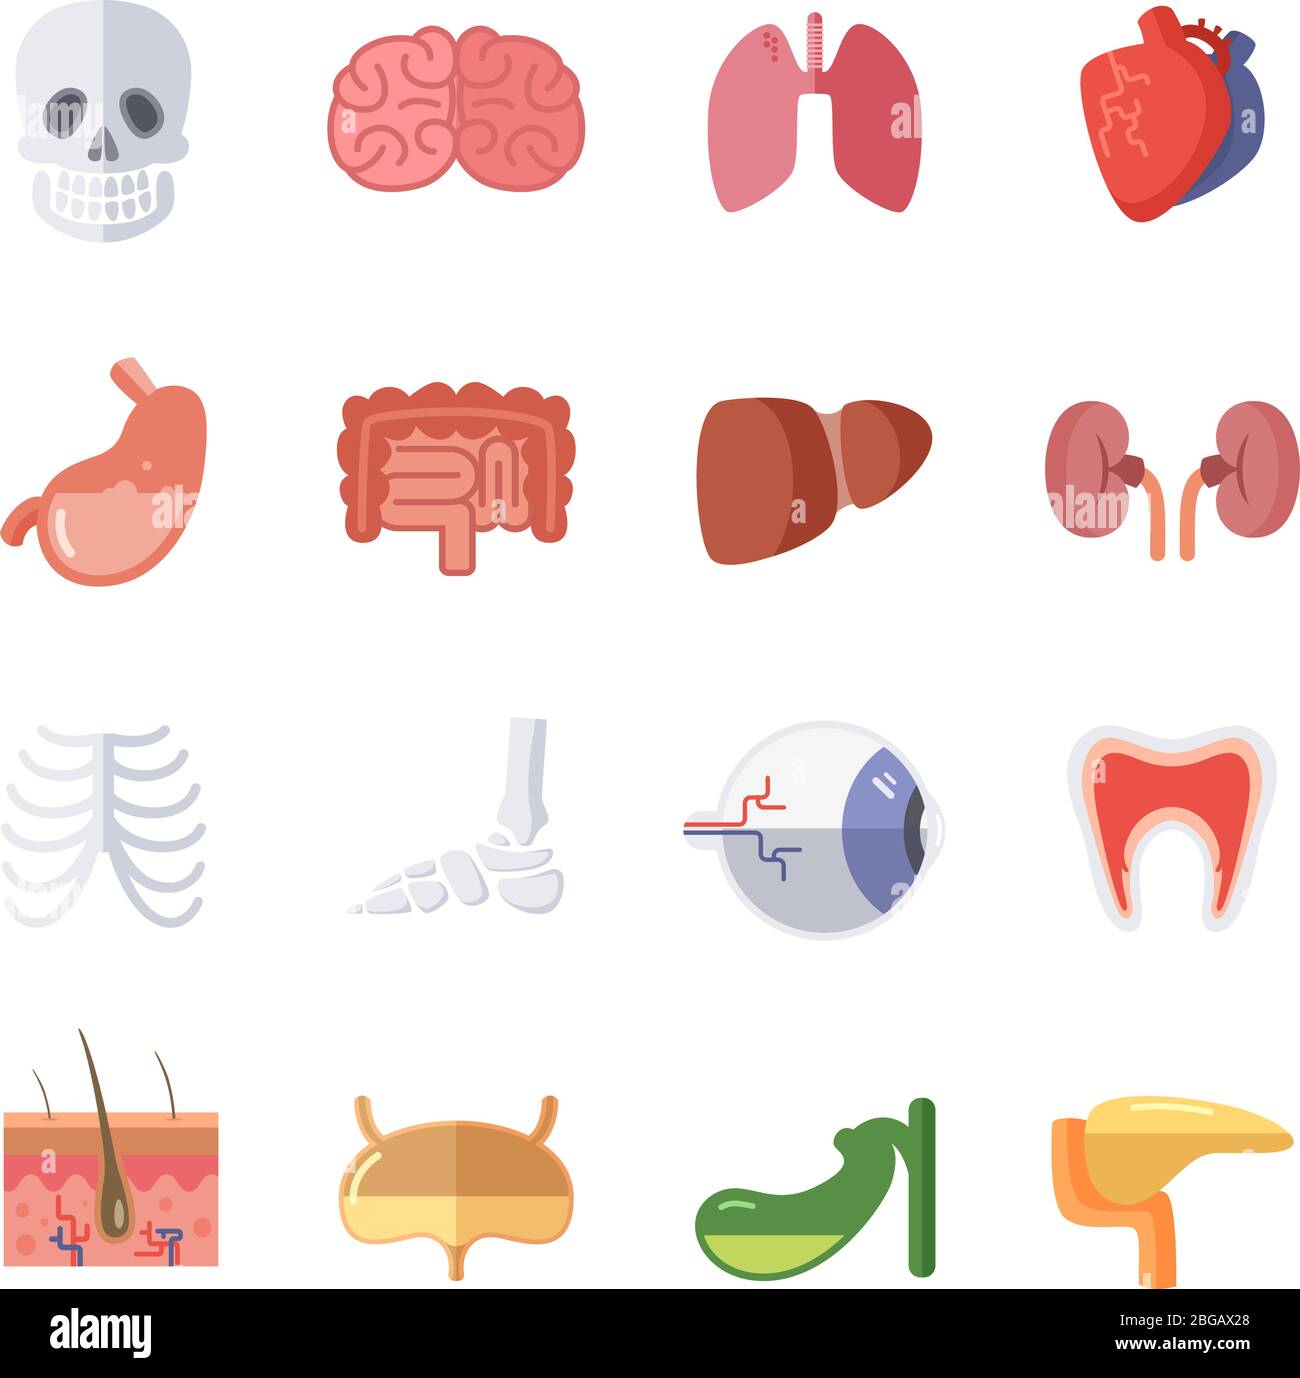 Male and female anatomy. Vector illustration set of human organs Stock Vector